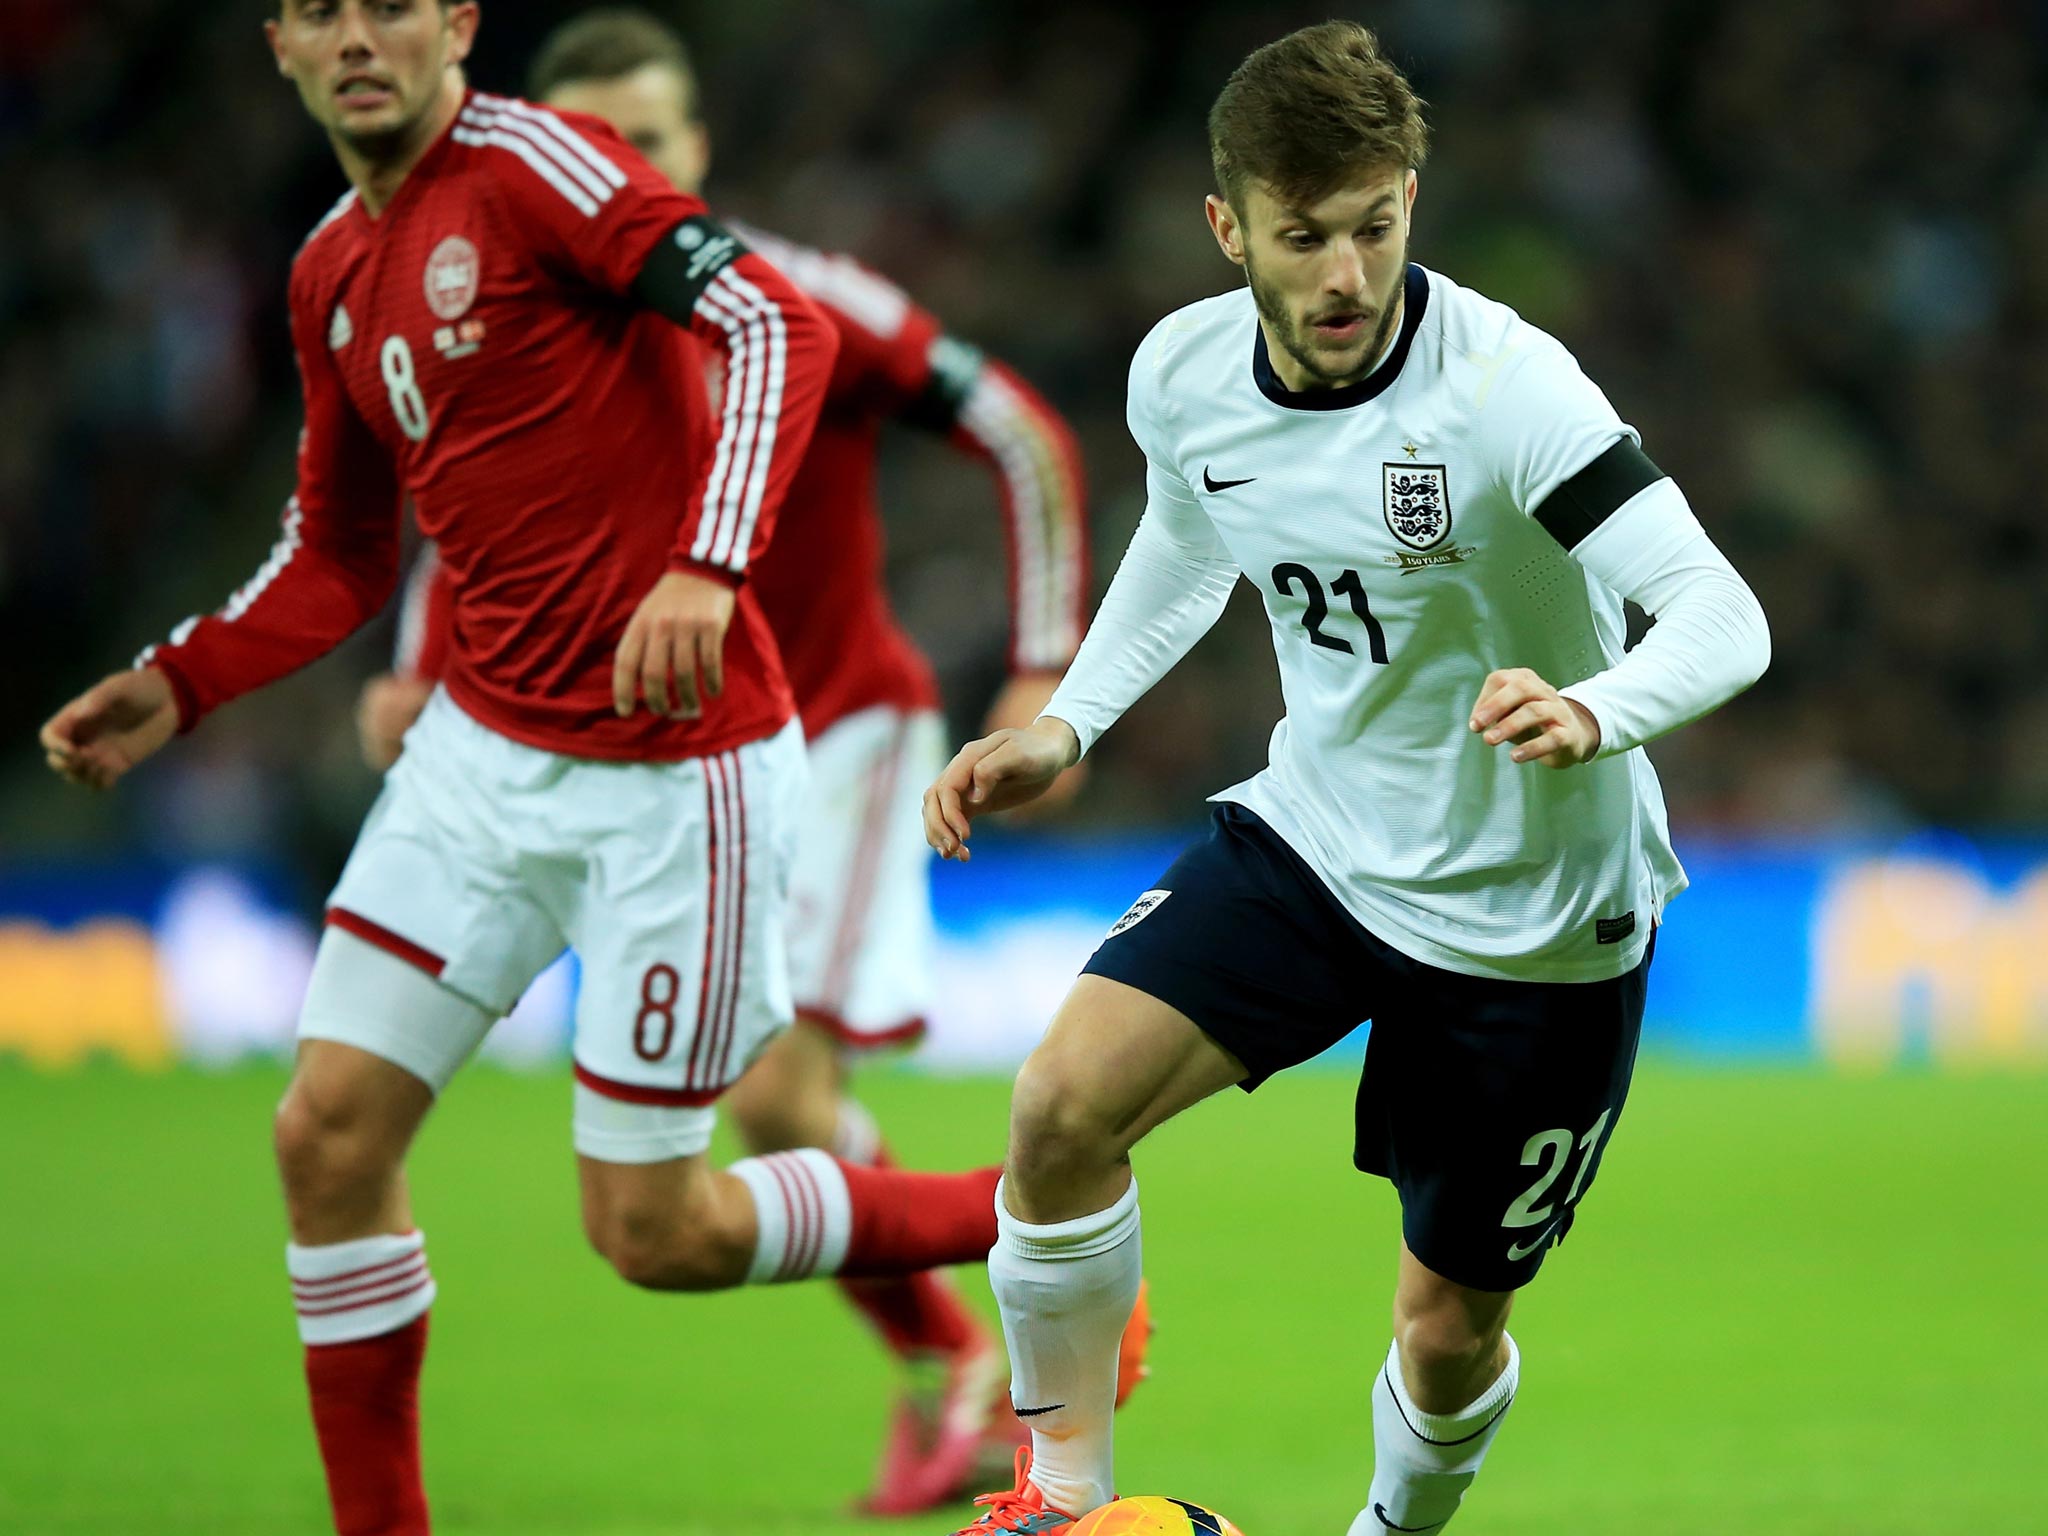 England midfielder Adam Lallana was pleased to get off the mark with his first victory for England against Denmark